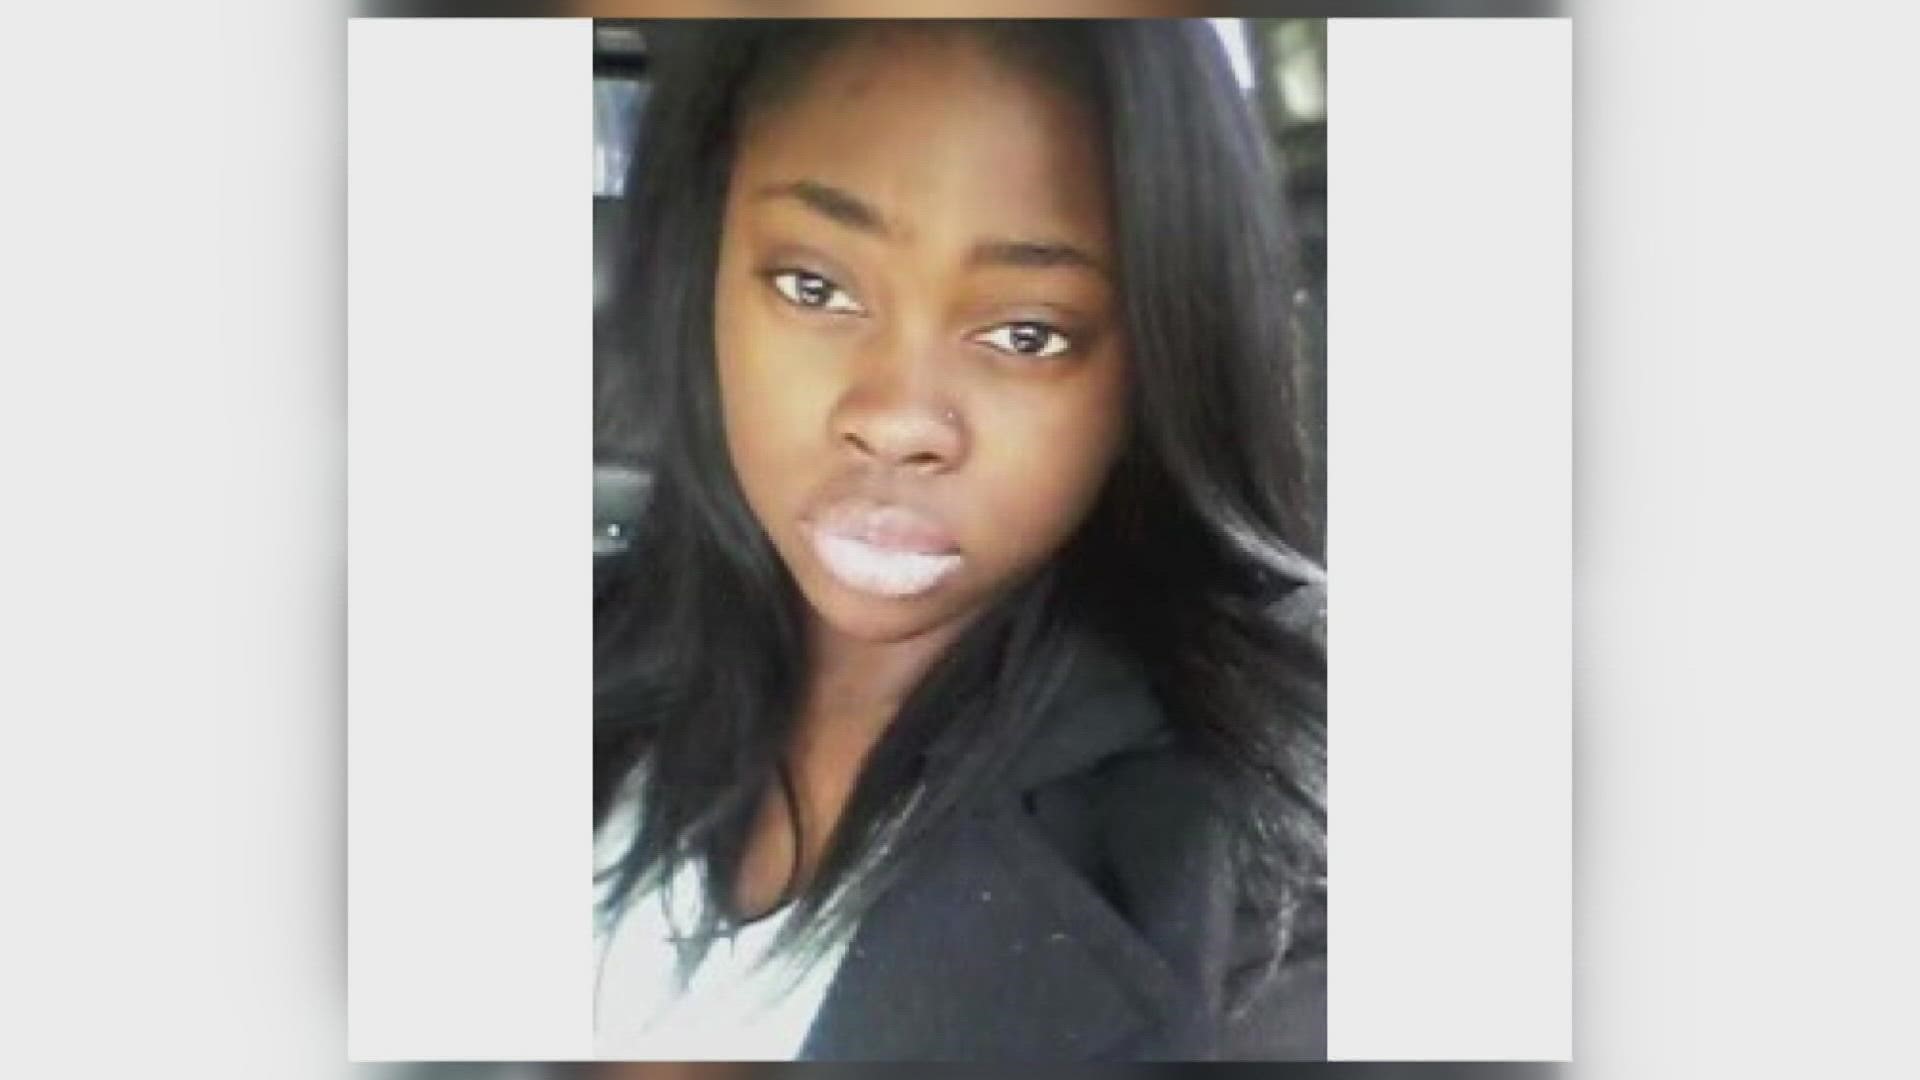 Authorities confirm they found the body of Desheena Kyle at a house on Sam Tillery Toad earlier this week.